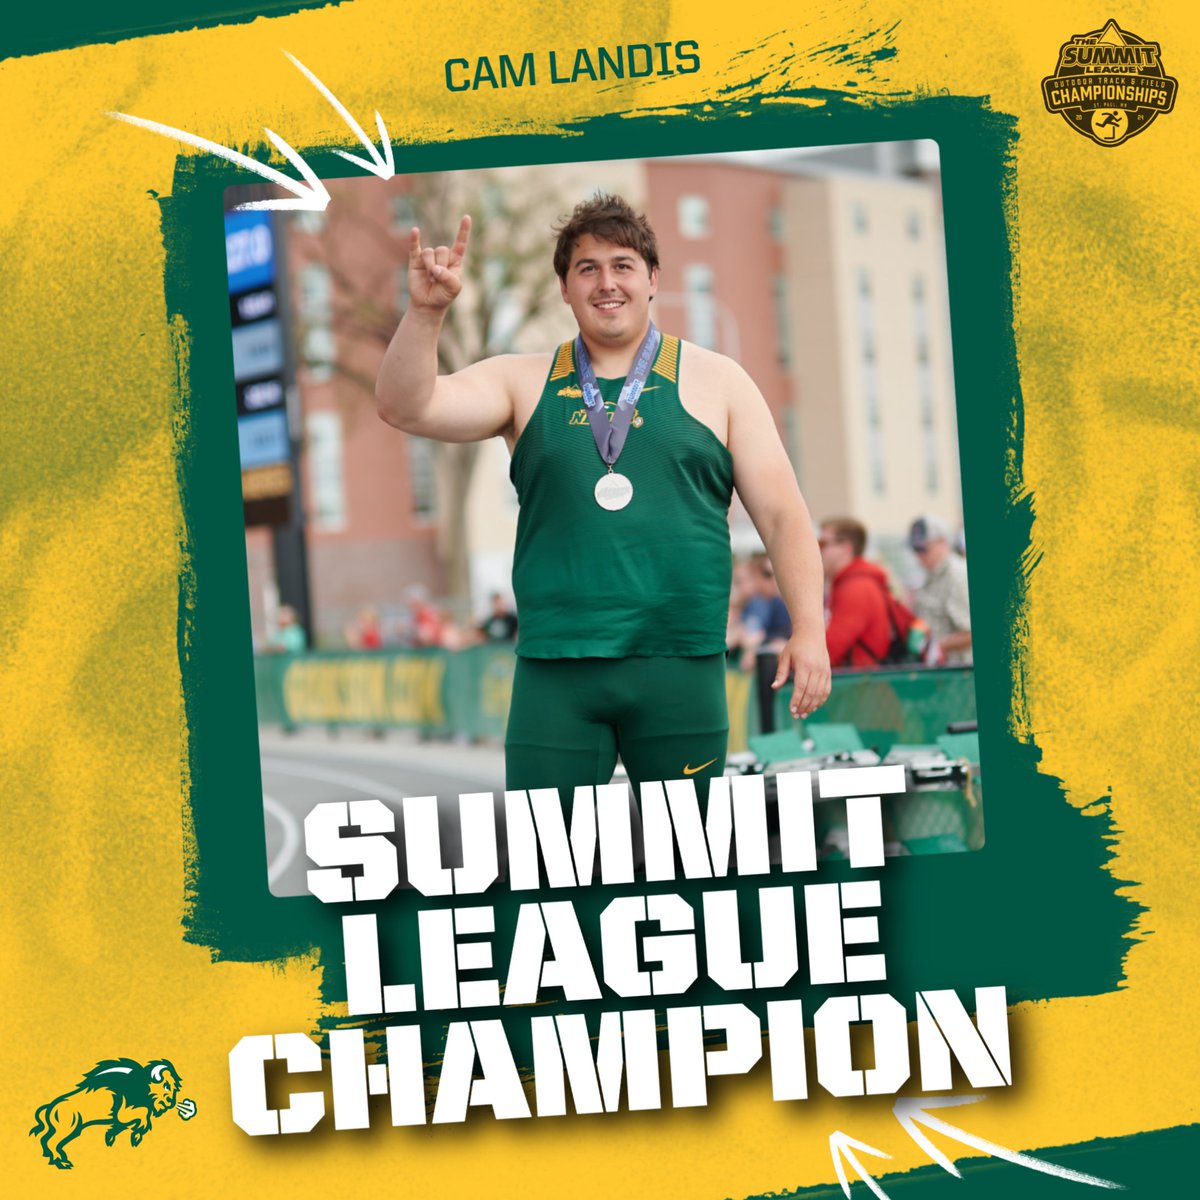 🥇 CHAMPION 🥇 Cam Landis wins his 2nd event of the meet, capturing the Summit League title in the discus with a career-best throw of 173-2 (52.78m)! He's No. 9 on the NDSU all-time list.